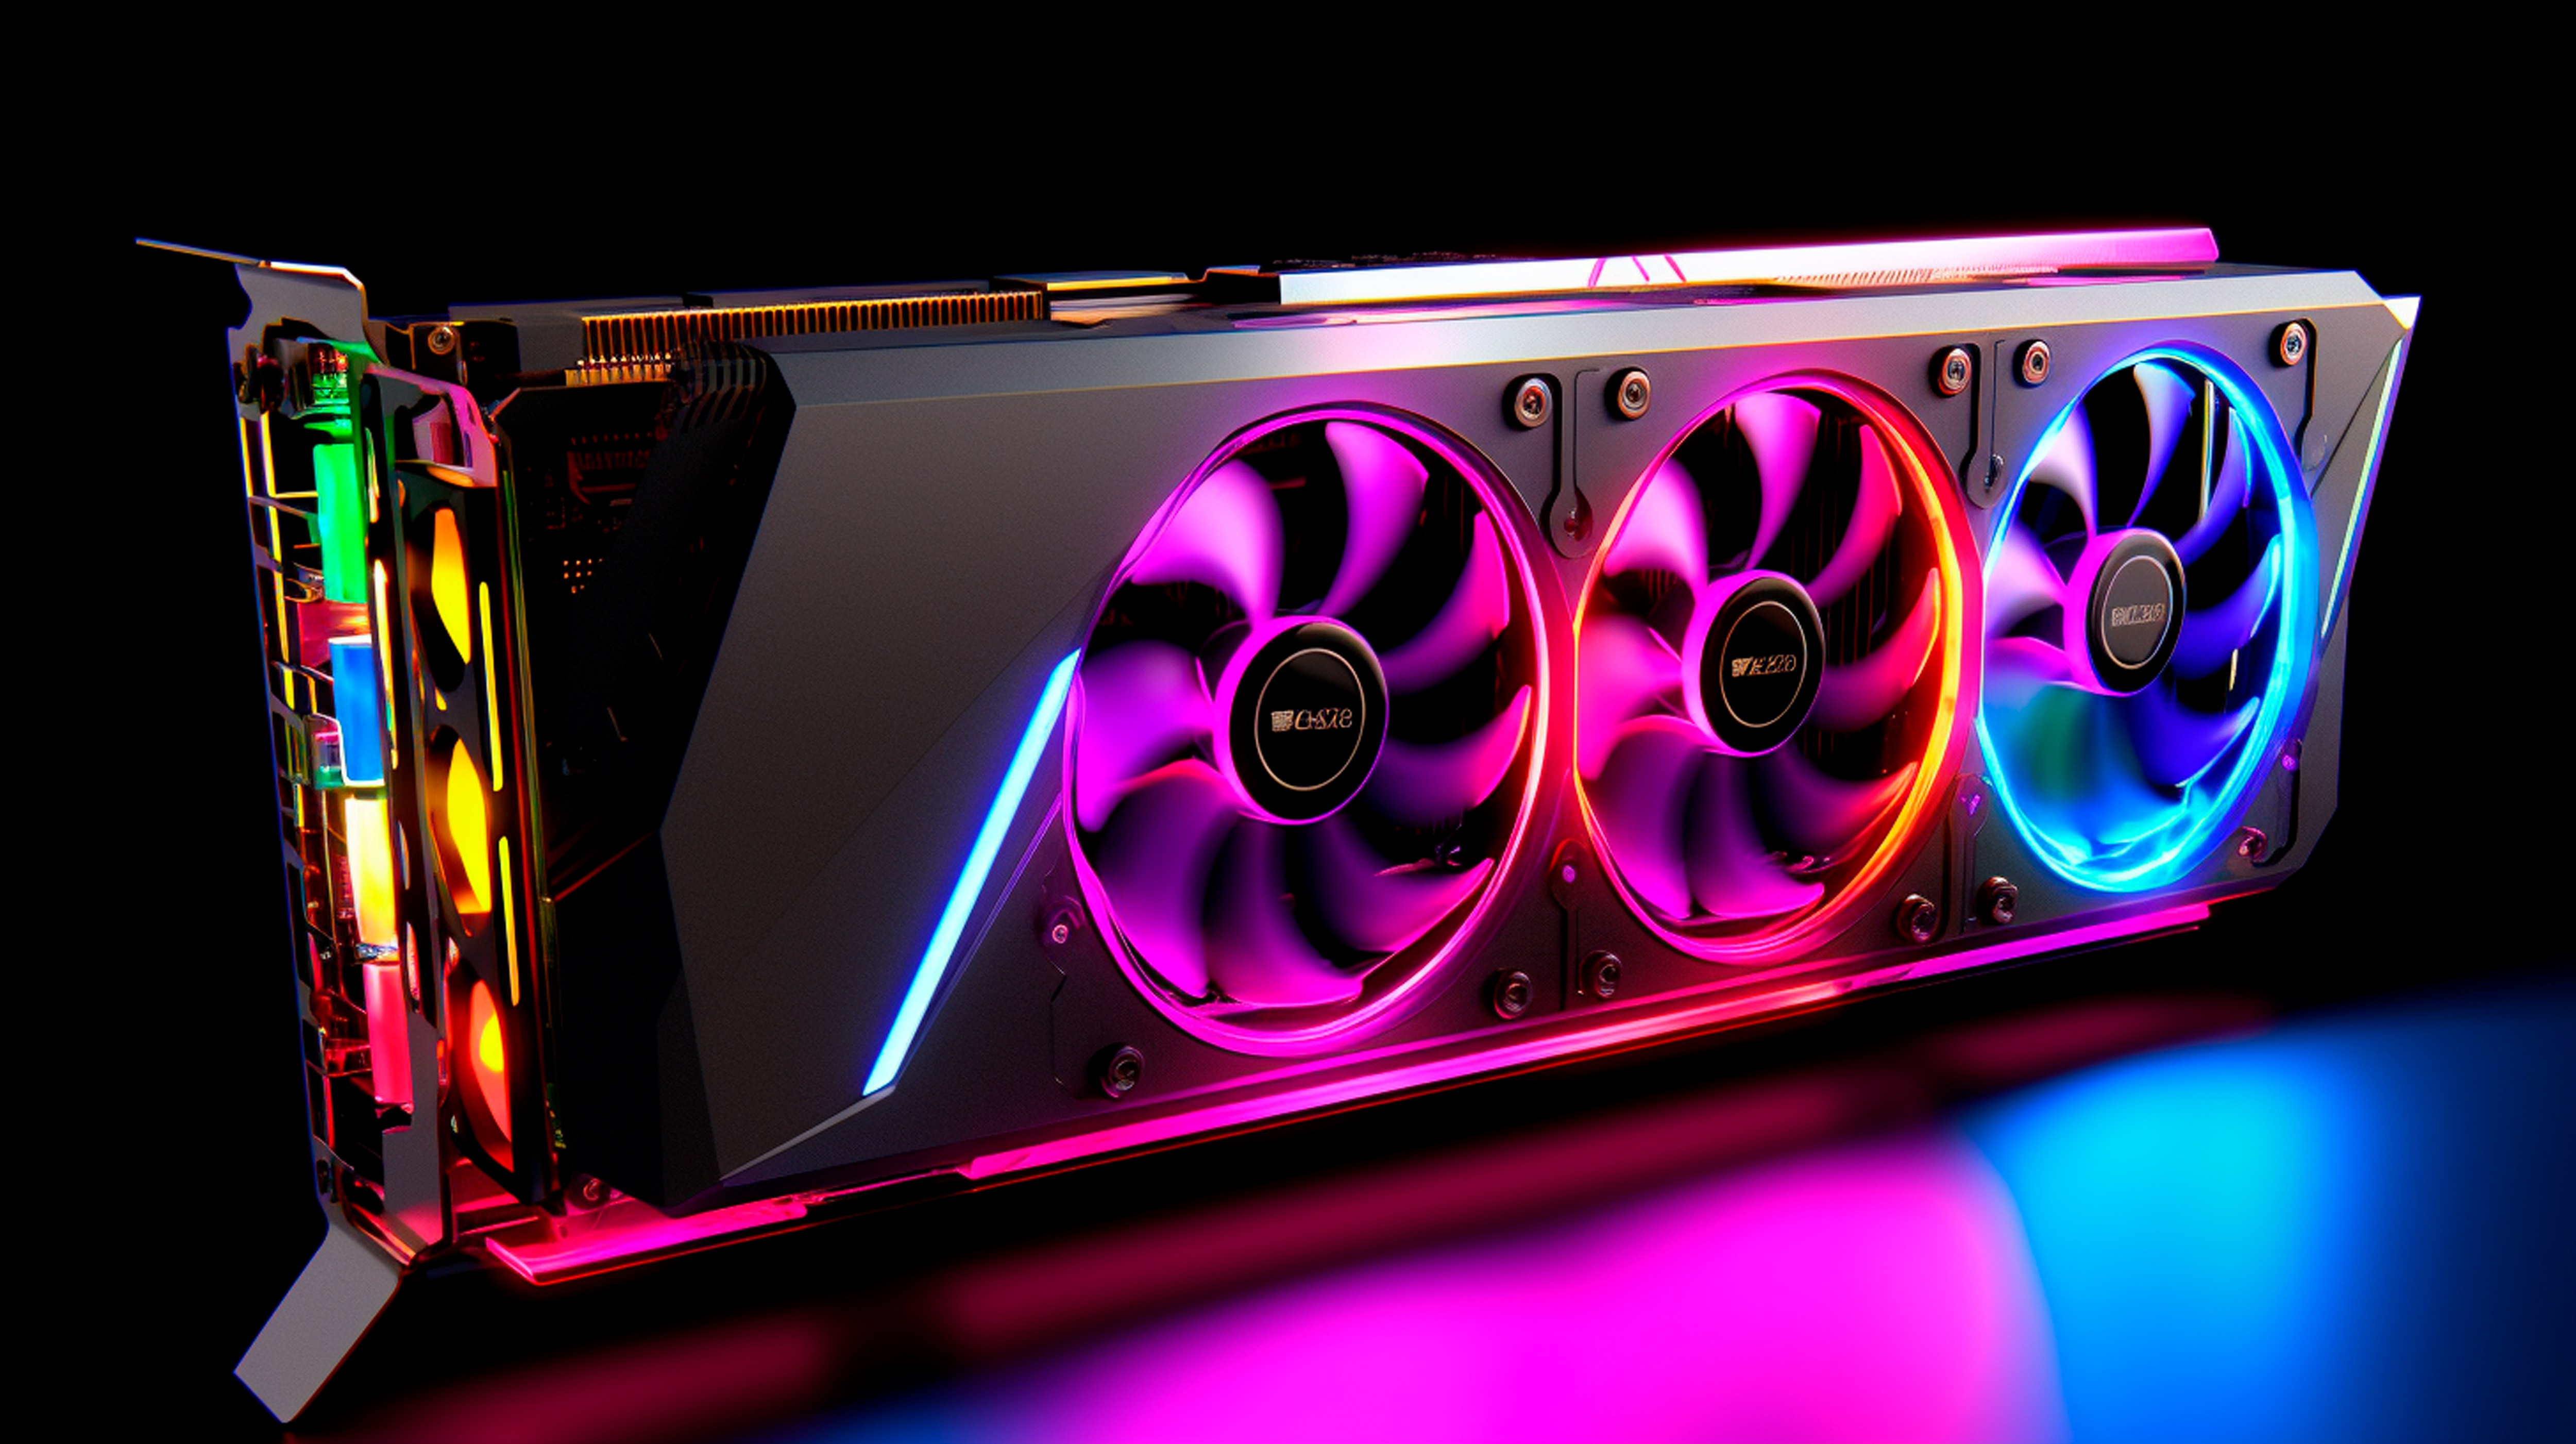 RX, GT, GTX, and RTX: Everything You Need to Know about Graphics Cards